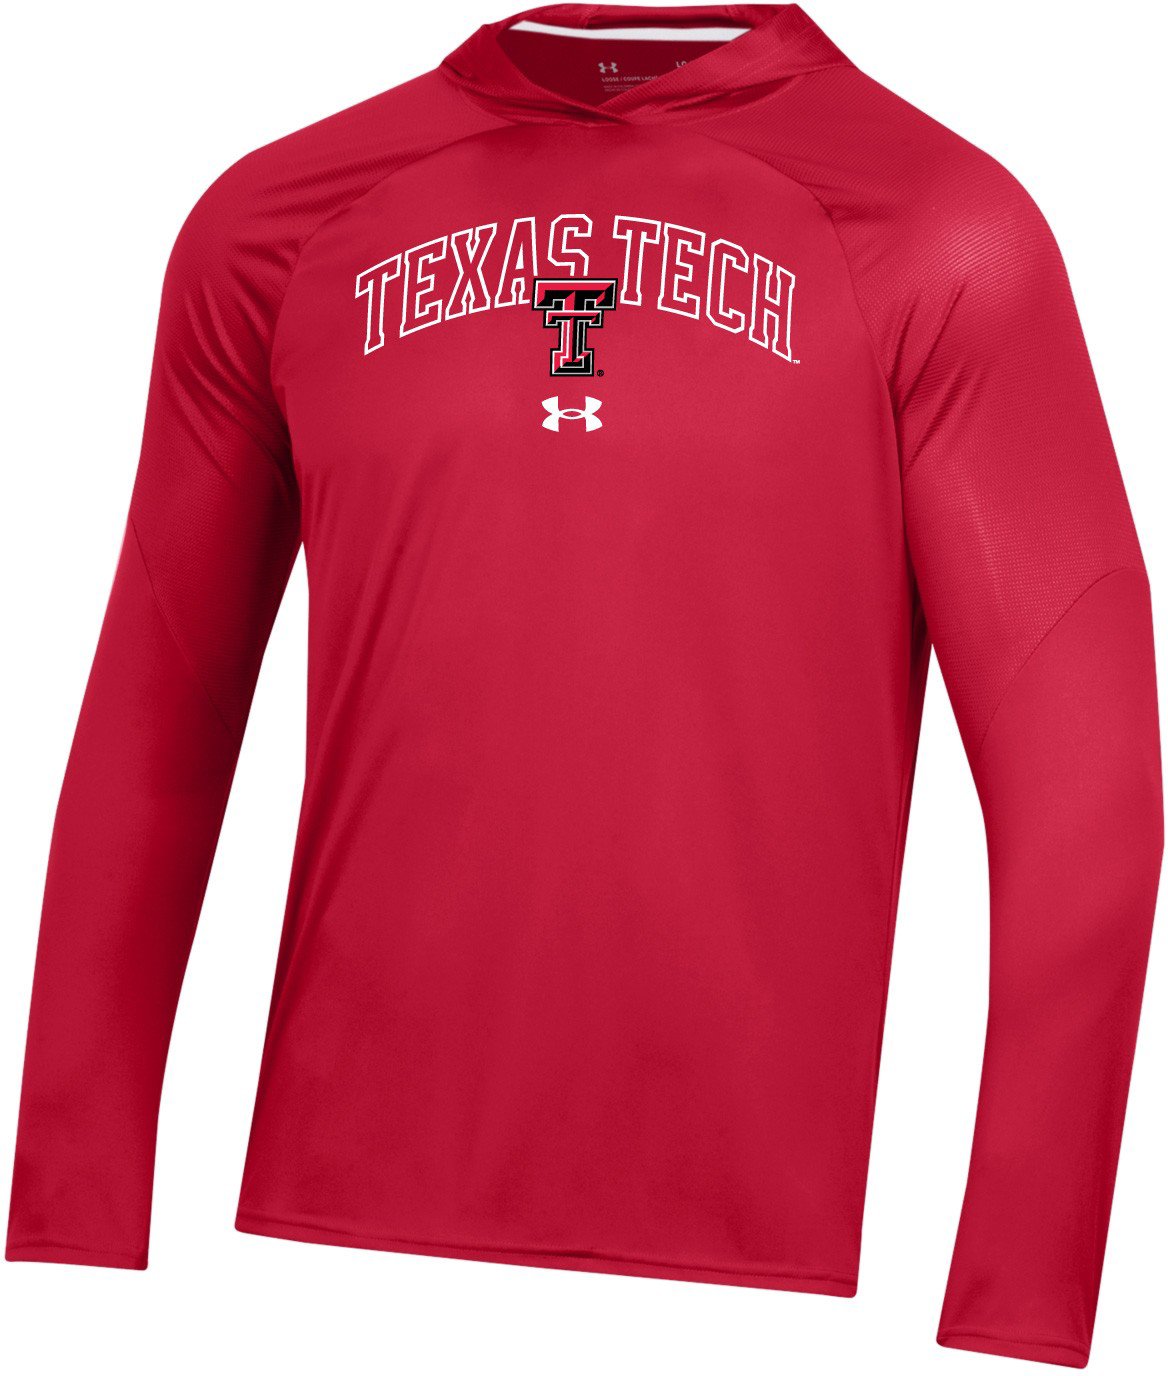 Under Armour Mens Texas Tech University Sideline Training Long Sleeve Hooded Top